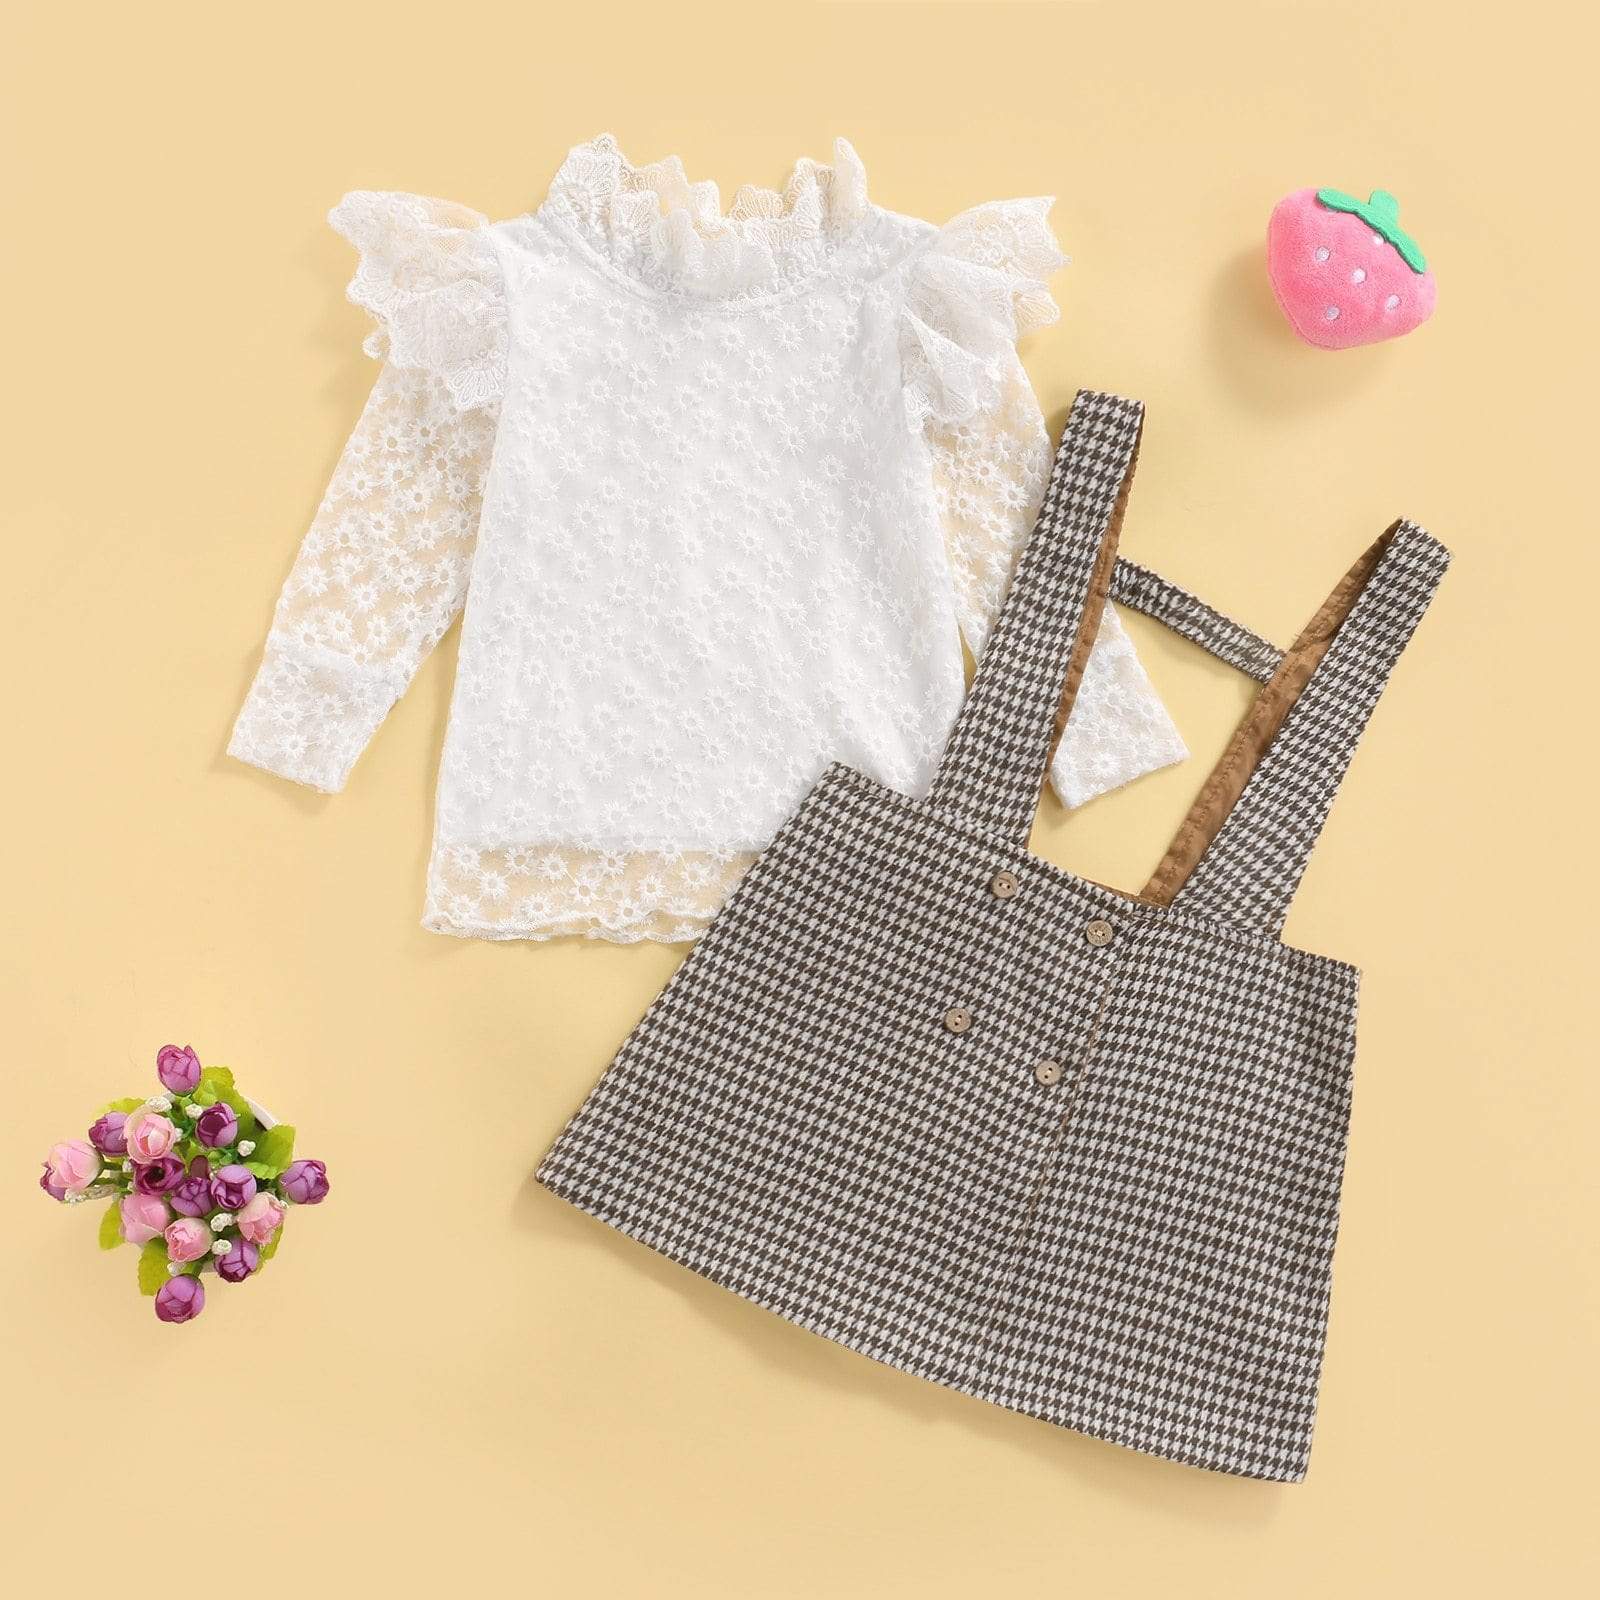 Girl's Clothing 5T Lace Floral Long Sleeve Ruffles Collar Tops Plaid Printed Suspender Skirts